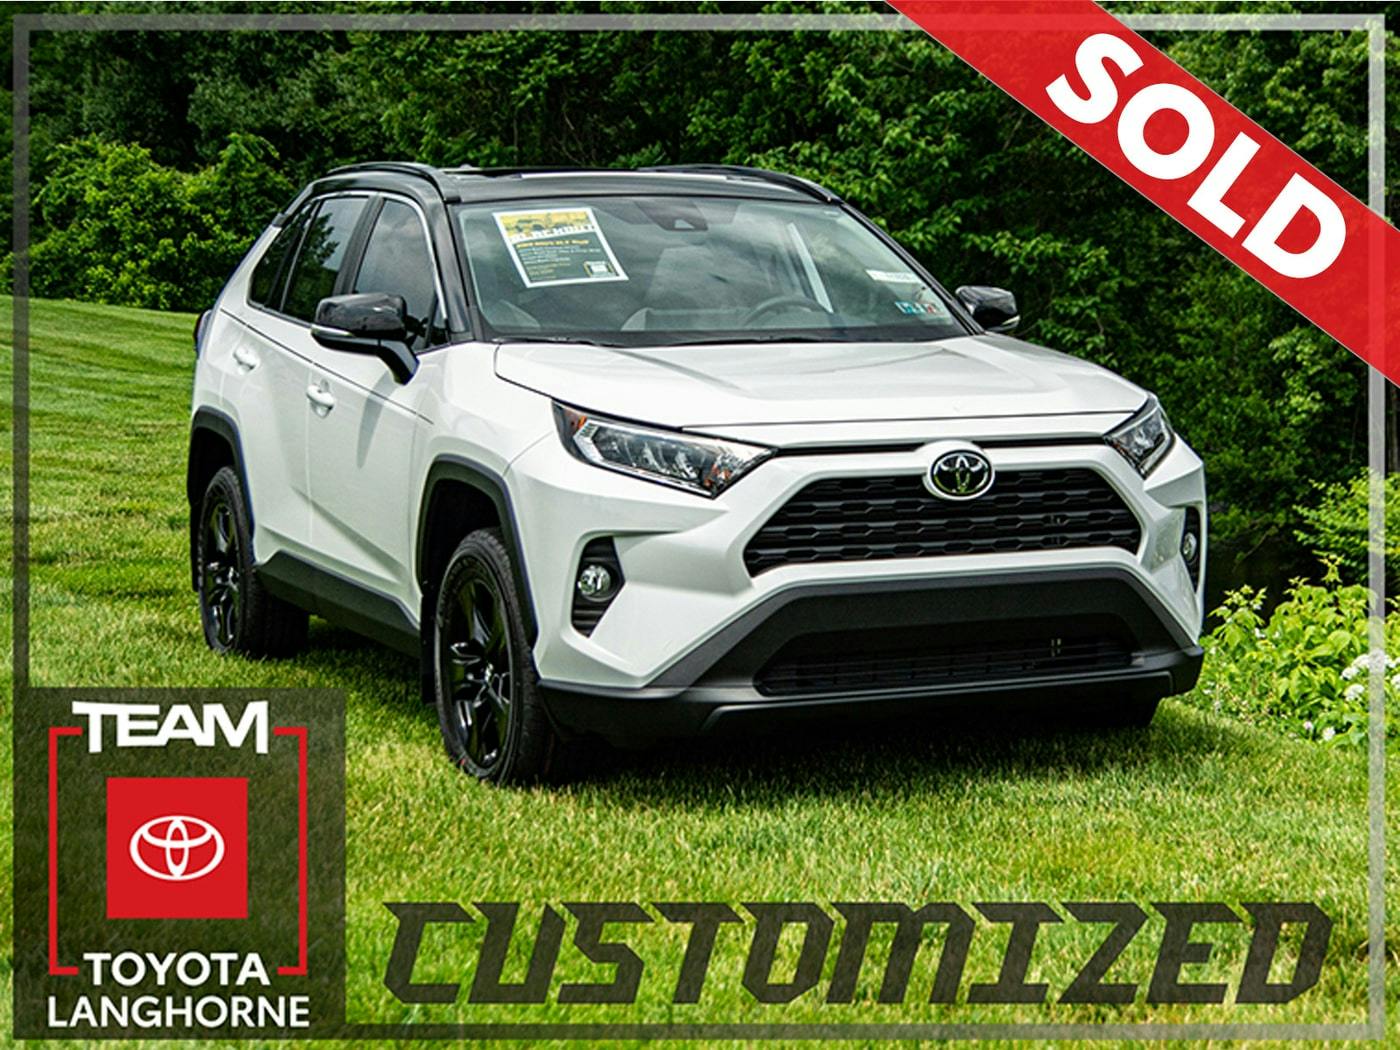 Team Toyota Customized New Vehicles blacked out RAV4